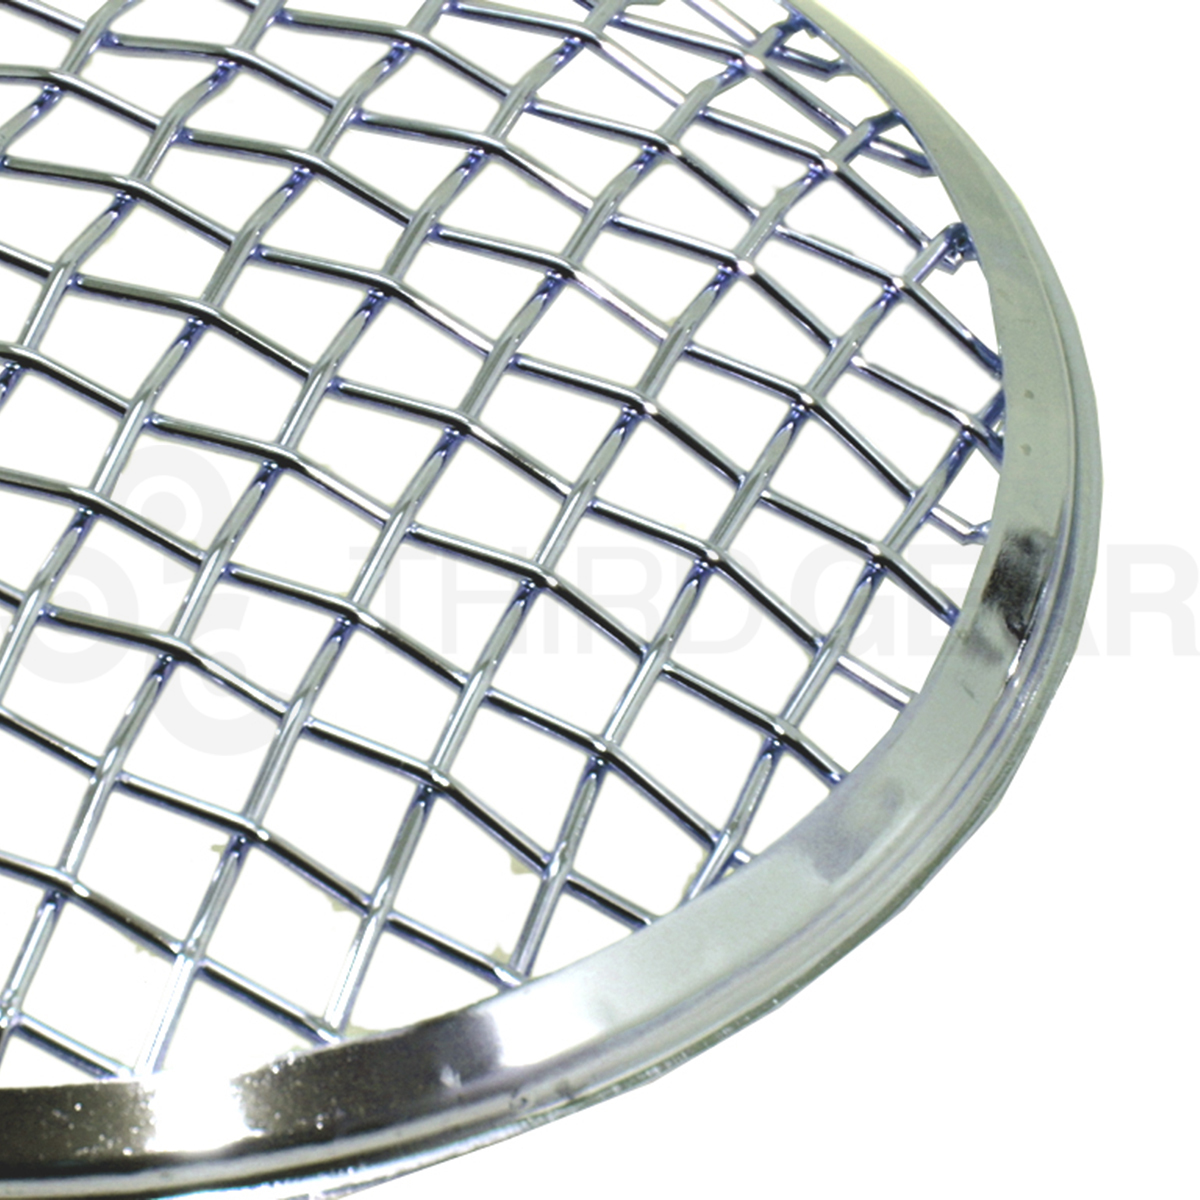 Motorcycle Mesh Metal Grill Cover for 7 Headlight Chrome Scrambler Project 